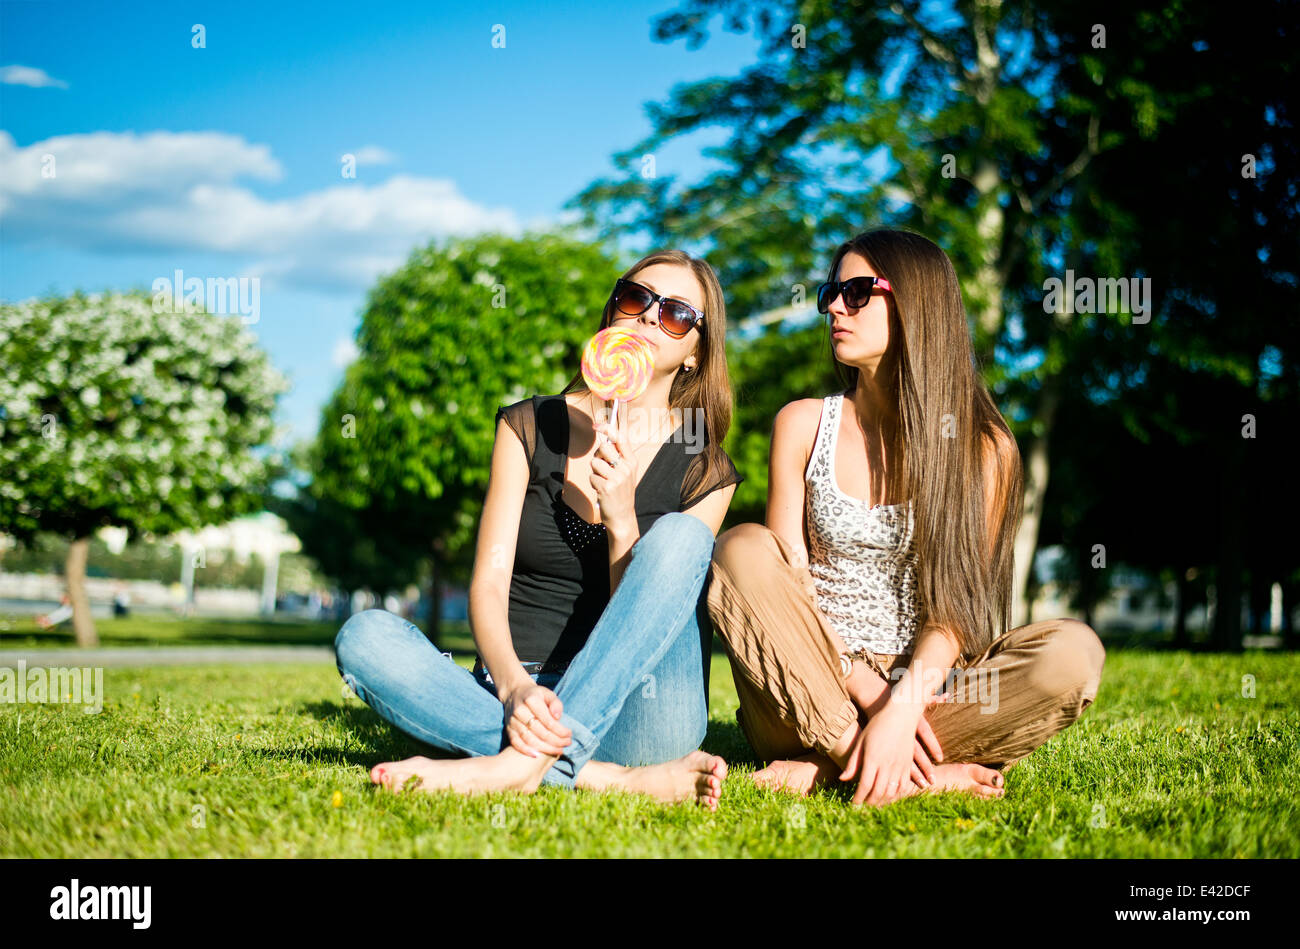 Two young female friends in park, one licking lollipop Stock Photo